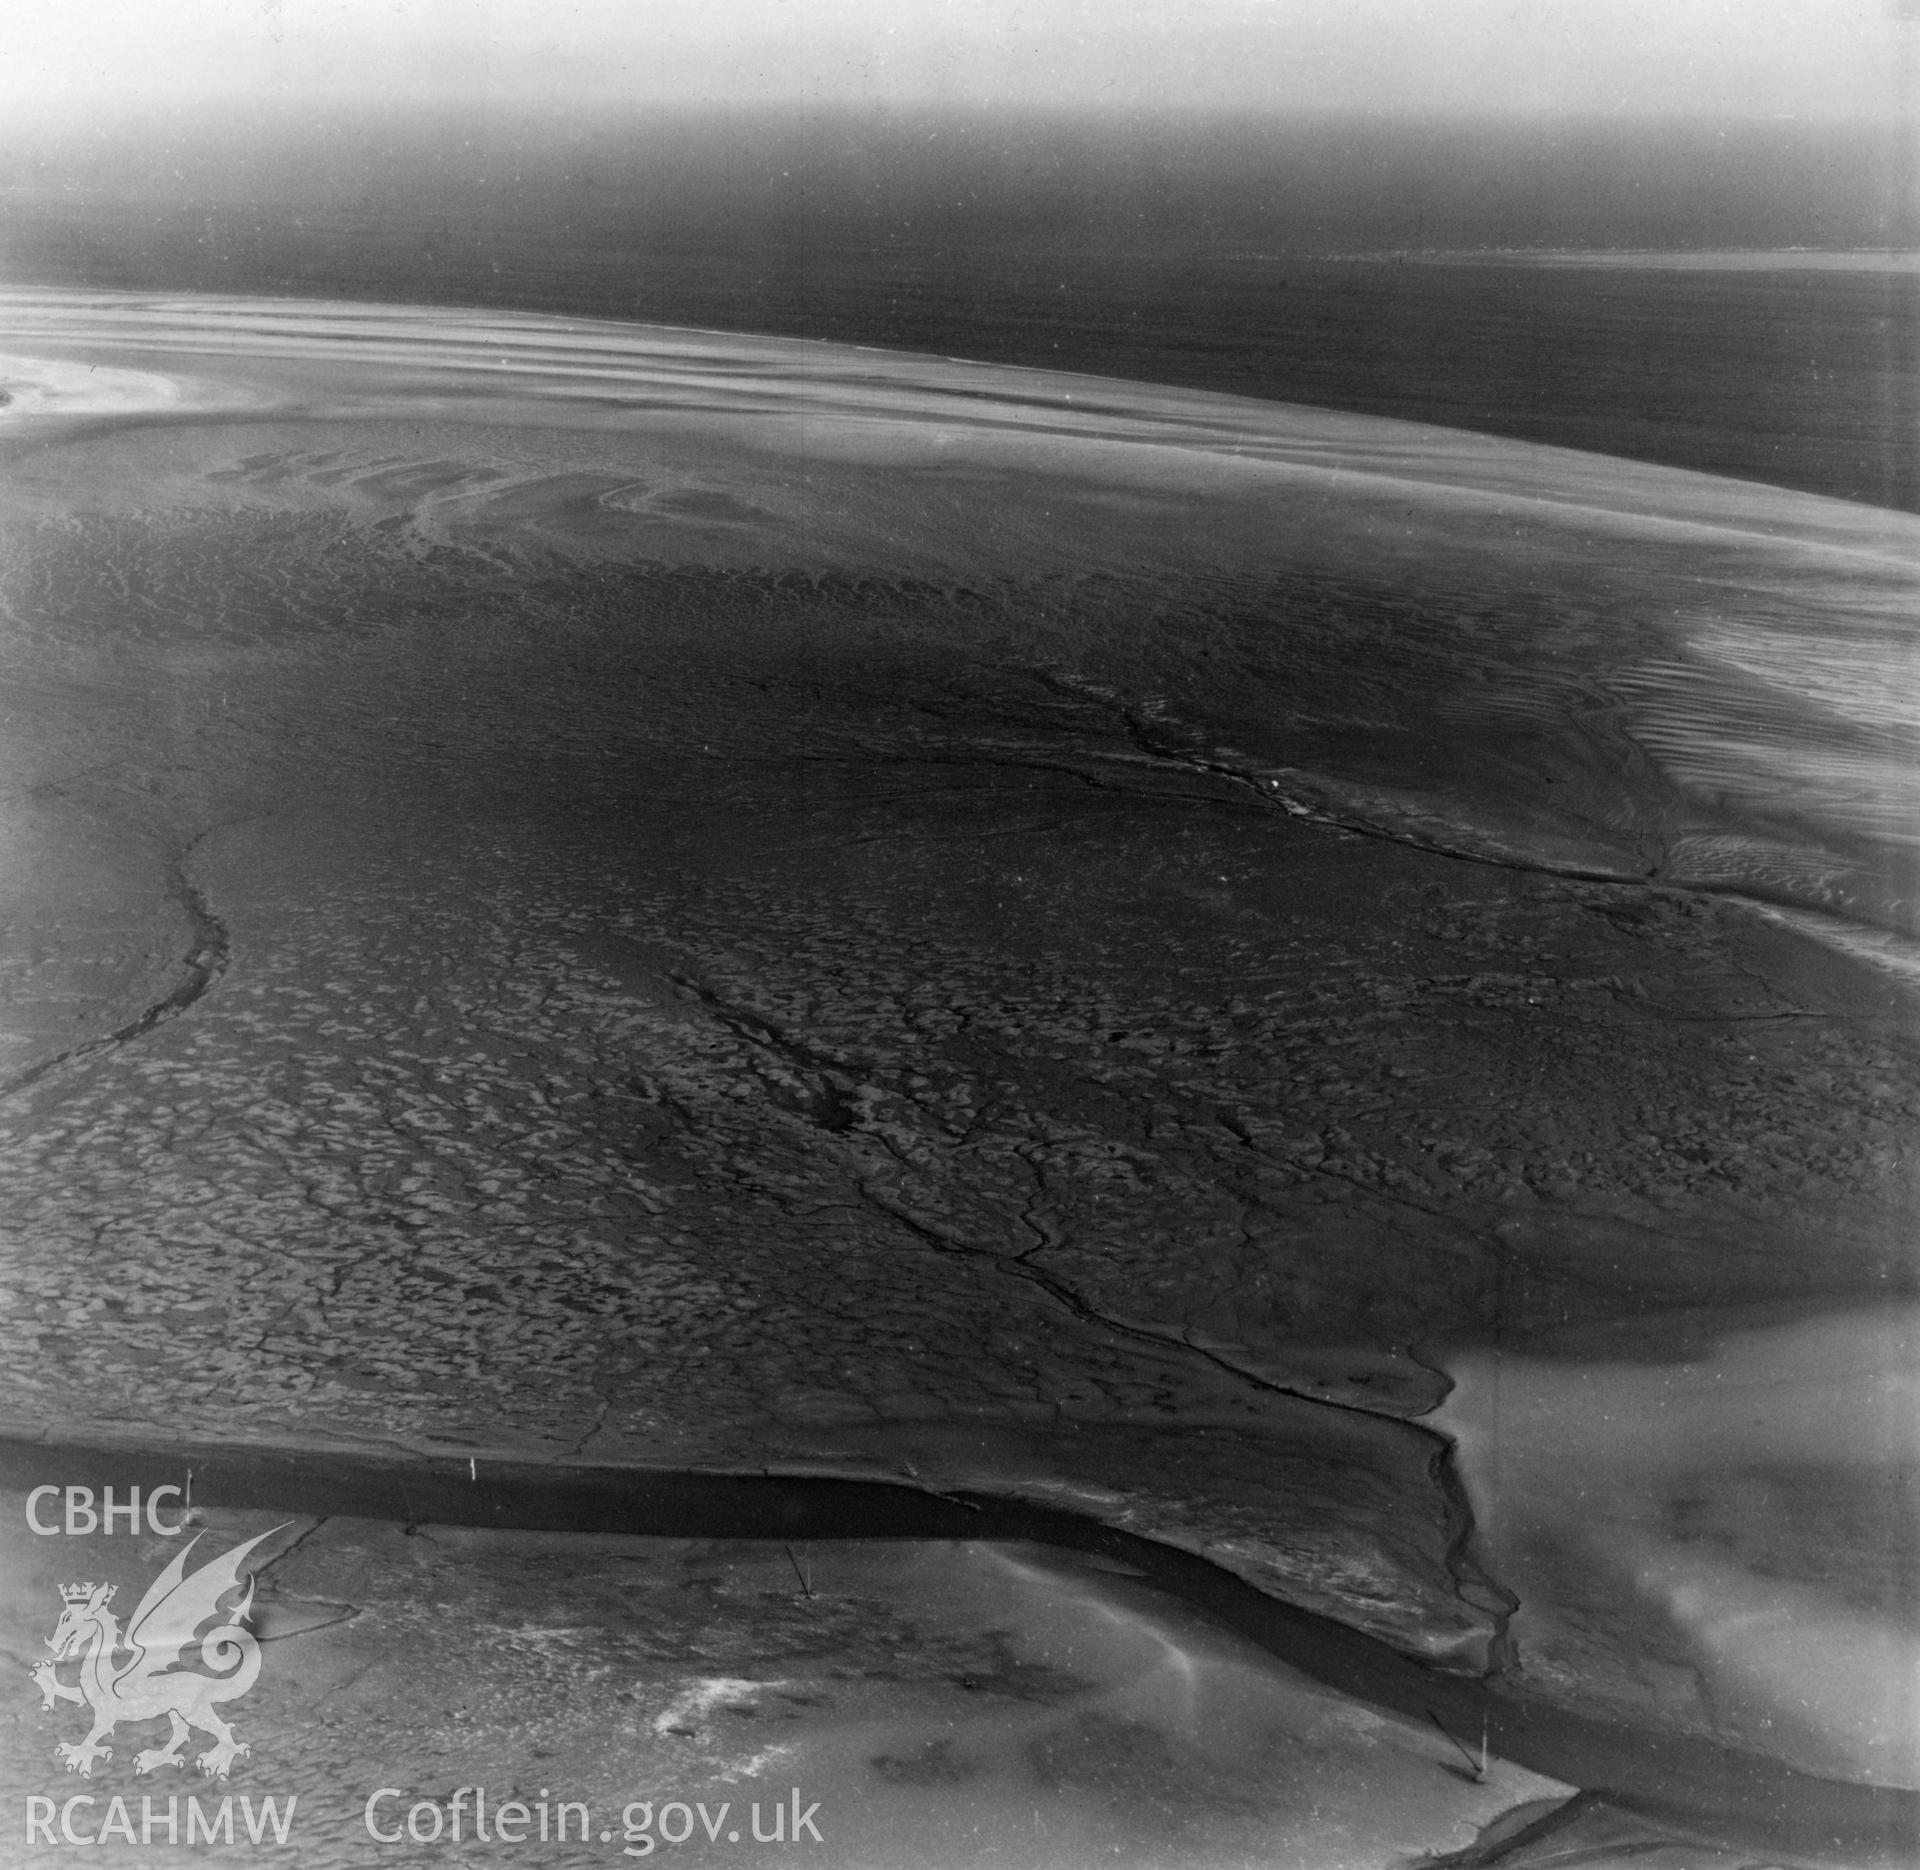 View of mudflats at Point of Ayr. Oblique aerial photograph, 5?" cut roll film.